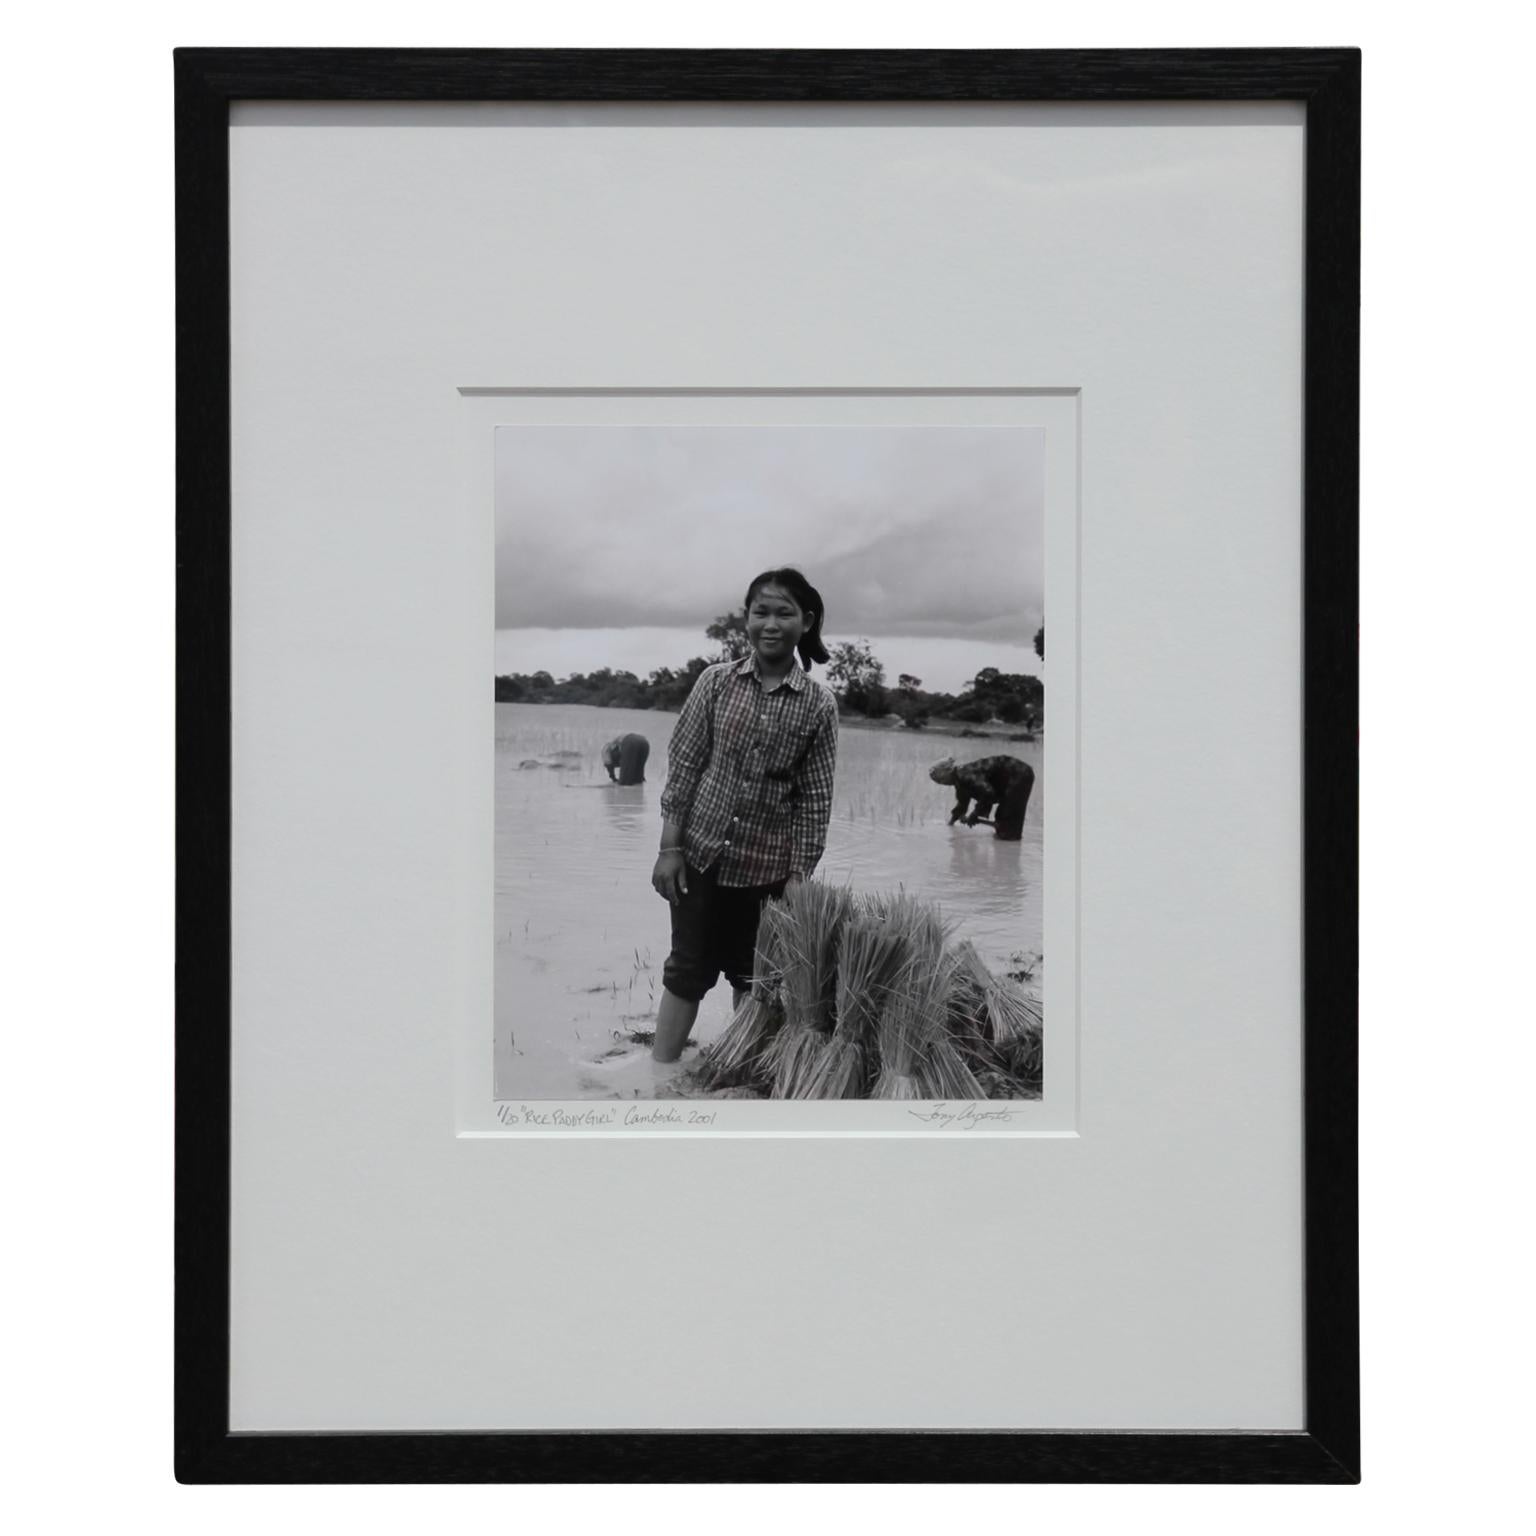 Tony Argento Figurative Photograph - "Rice Paddy Girl" Siem Reap, Cambodia Black and White Photograph